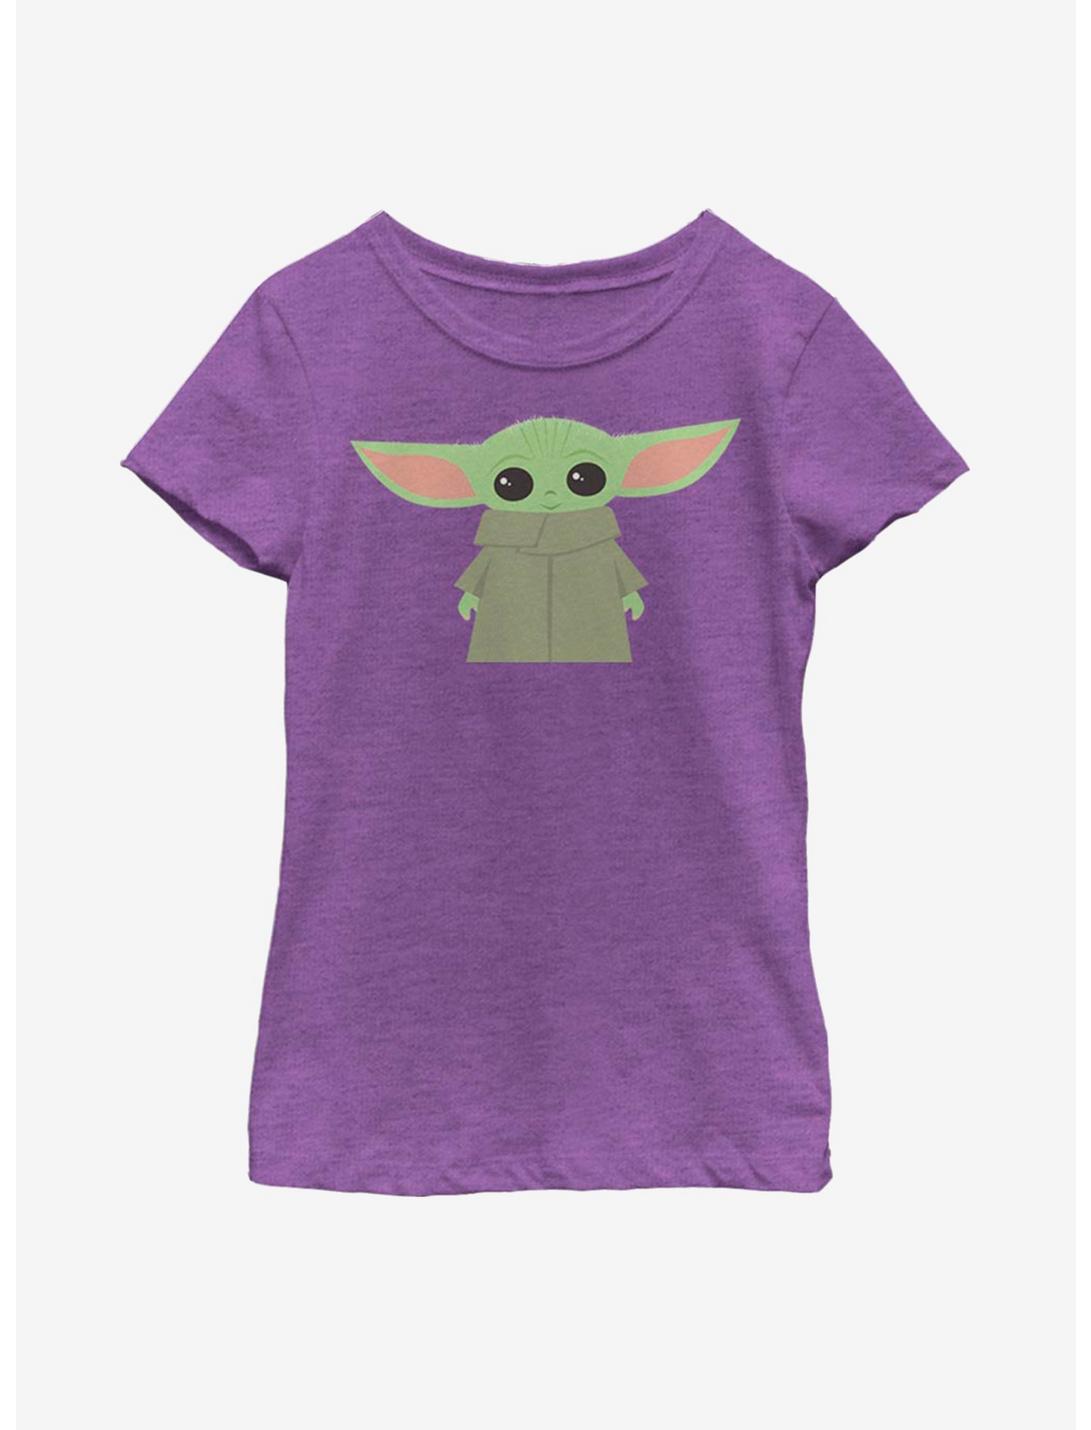 Star Wars The Mandalorian The Child Simple And Cute Youth Girls T-Shirt, PURPLE BERRY, hi-res